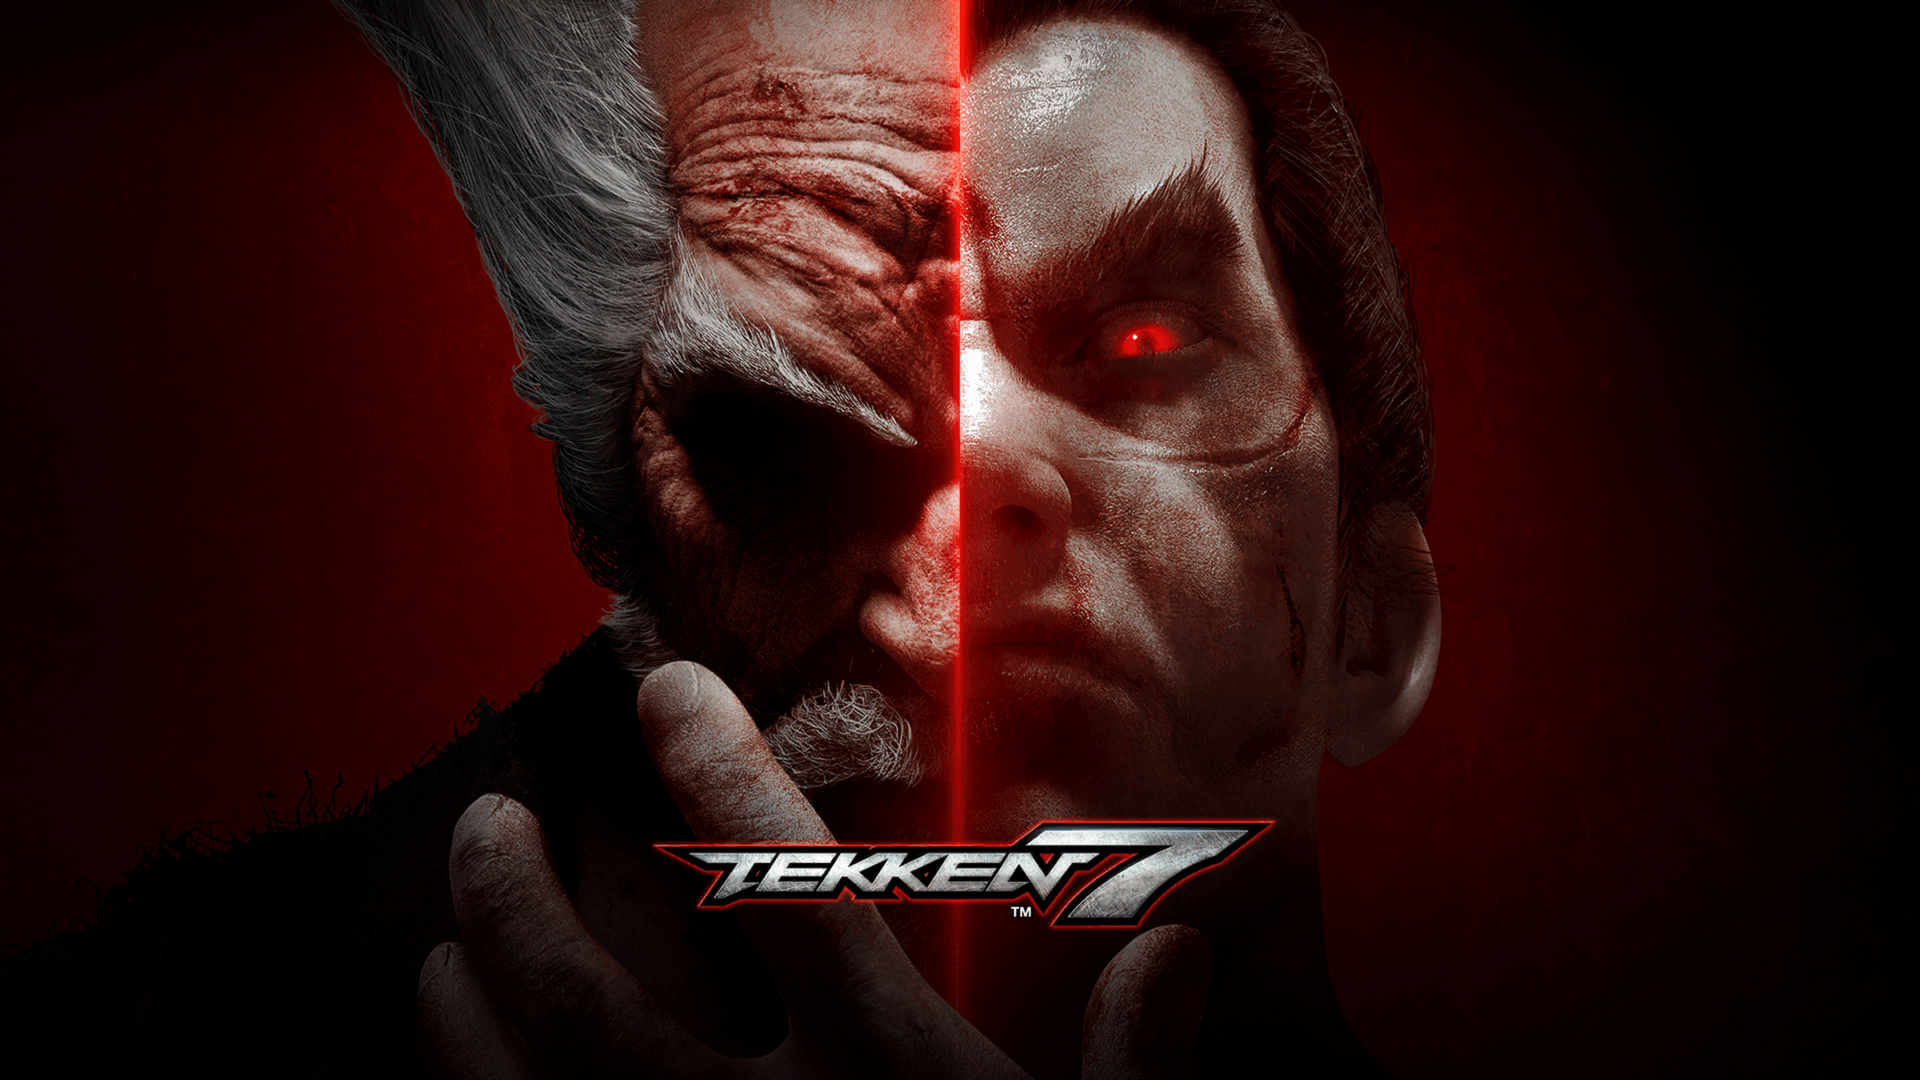 Tekken 7 Free Redeemable Codes For Xbox One and PS4 A Code